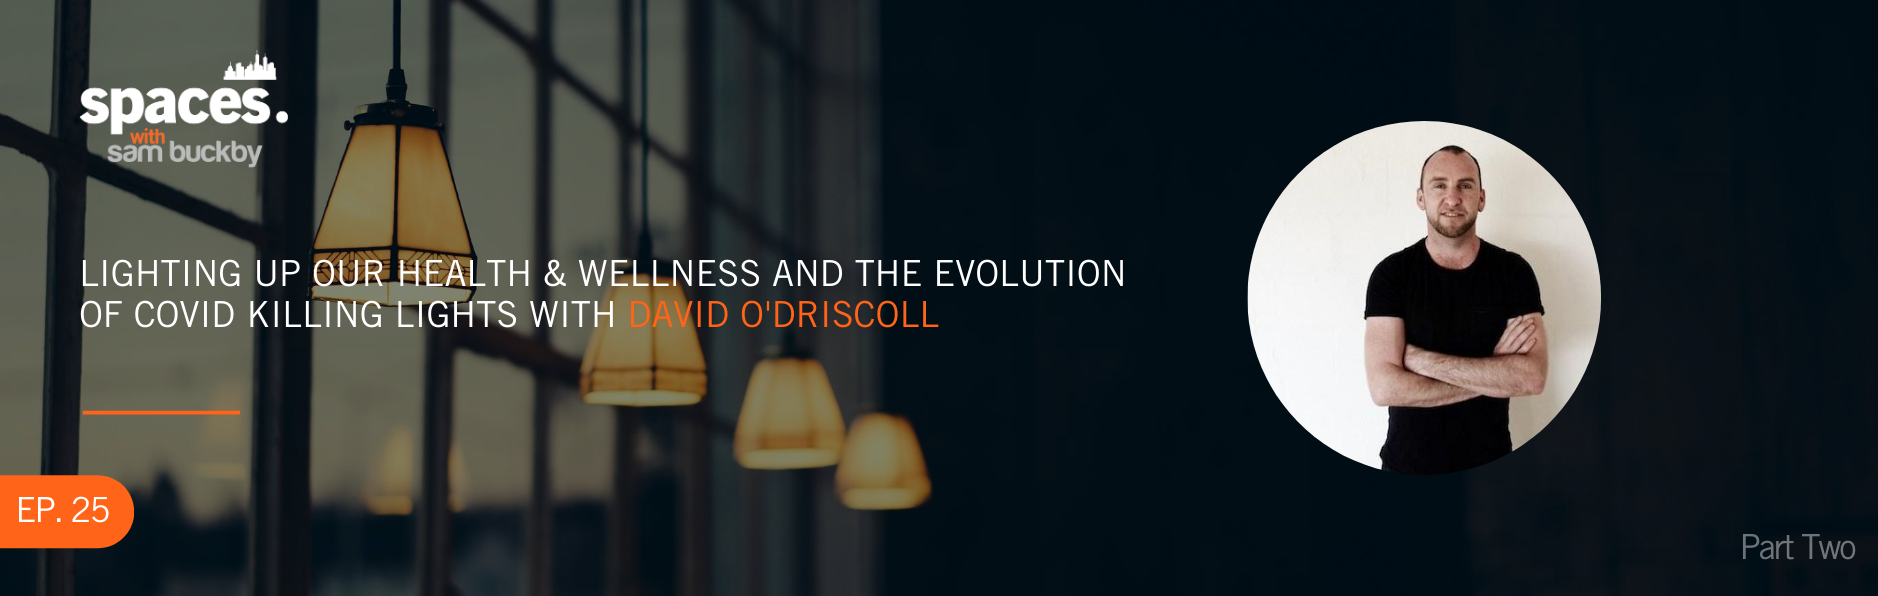 Episode 25. Lighting up our health and wellness and the evolution of COVID killing lights with David O’Driscoll (Part 2)